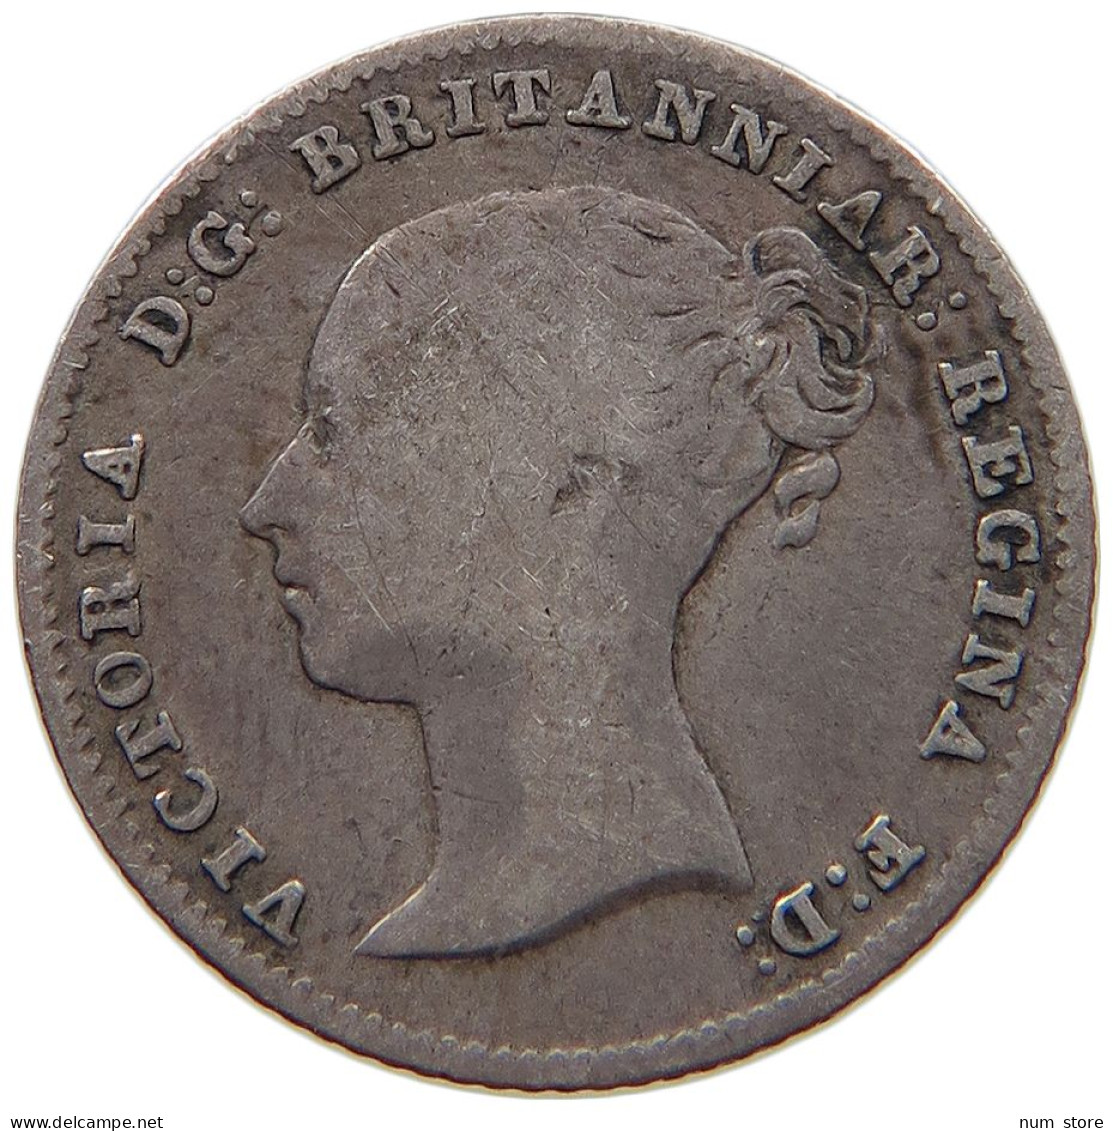 GREAT BRITAIN FOURPENCE 1838/8 Victoria 1837-1901 #t082 0057 - G. 4 Pence/ Groat